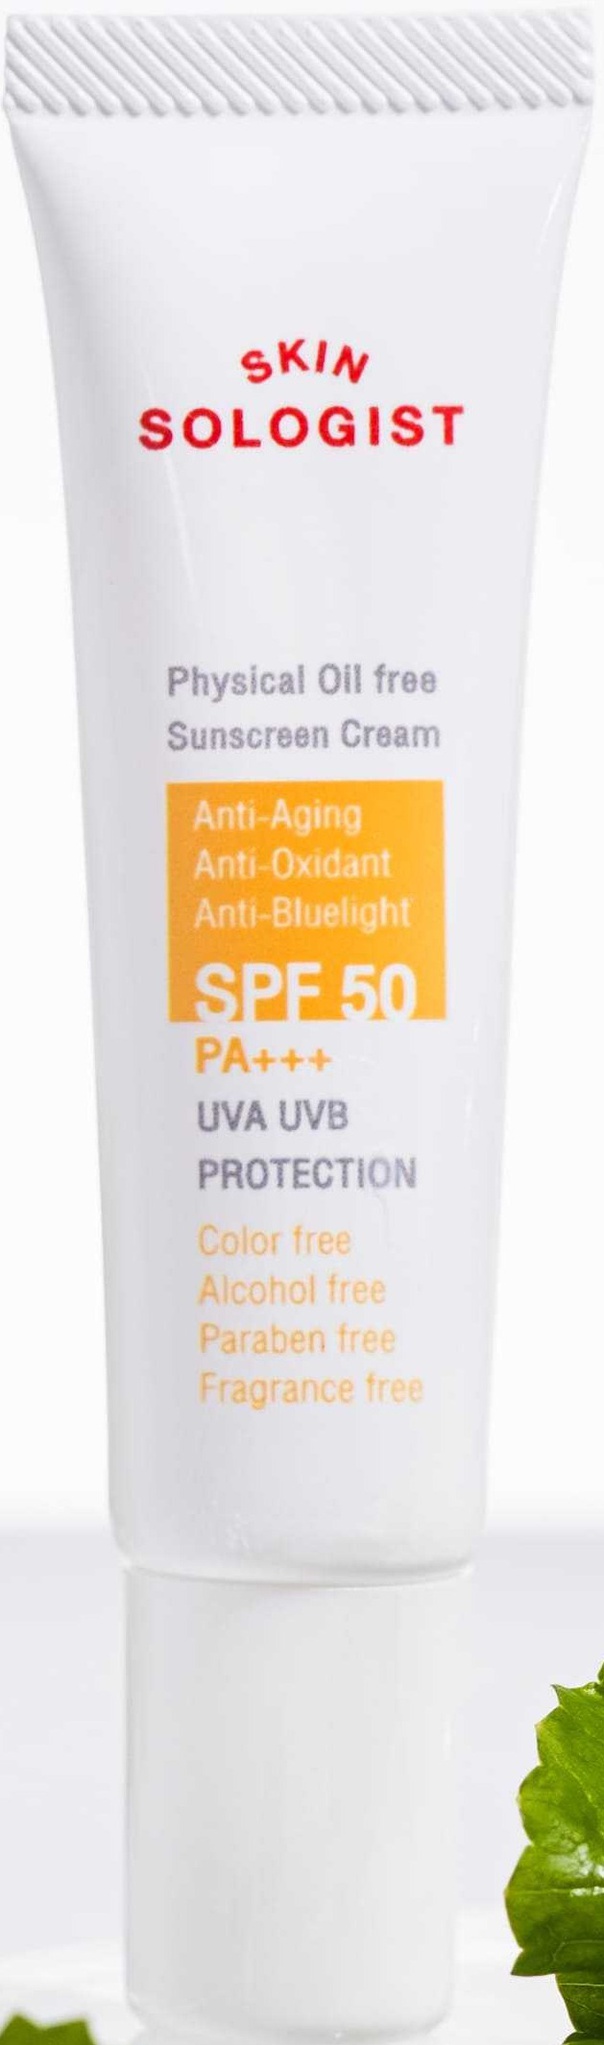 Skinsologist Physical Oil Free Sunscreen